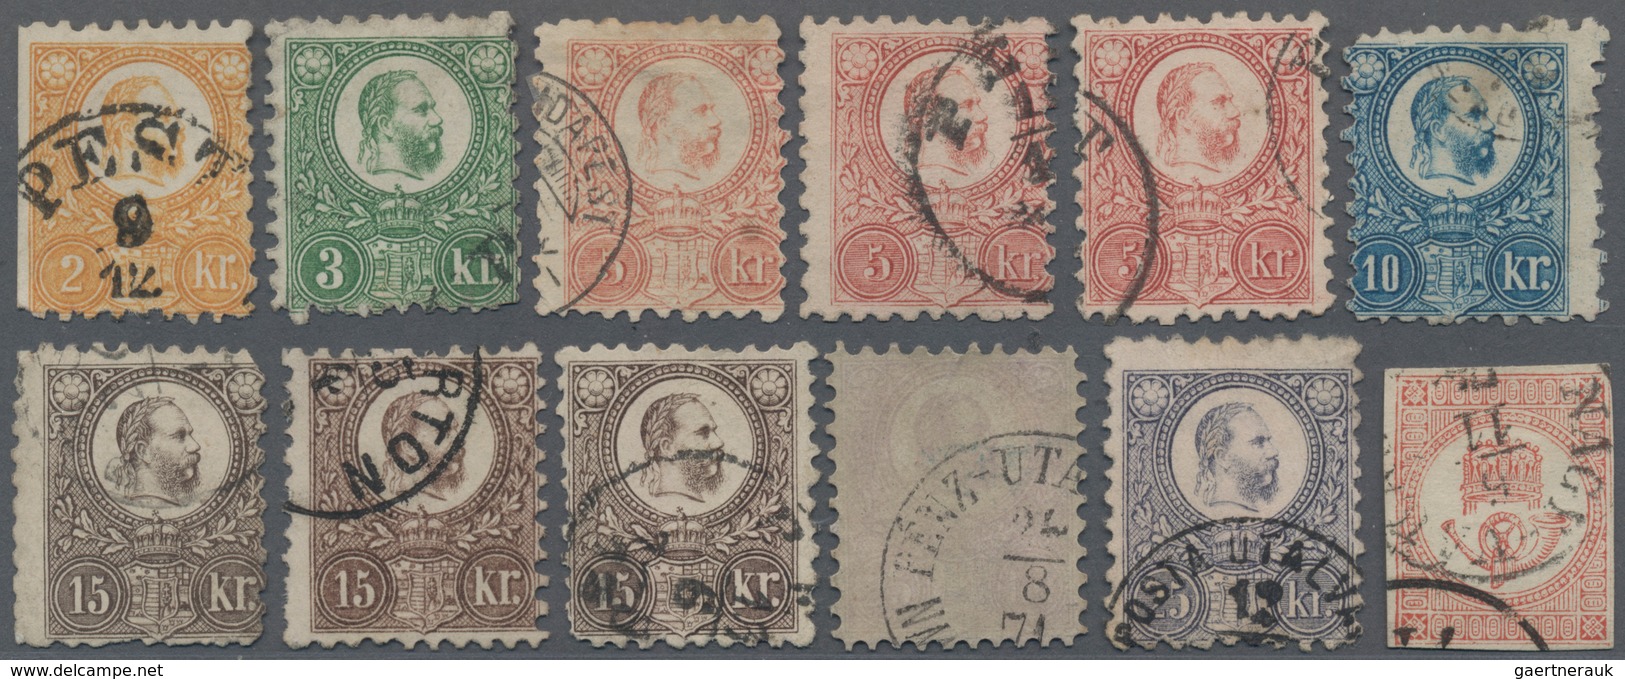 Ungarn: 1871-99 Ca.: Group Of 30 Used Stamps, With 12 Singles Of 1871 Franz Joseph Issues, One 1871 - Briefe U. Dokumente